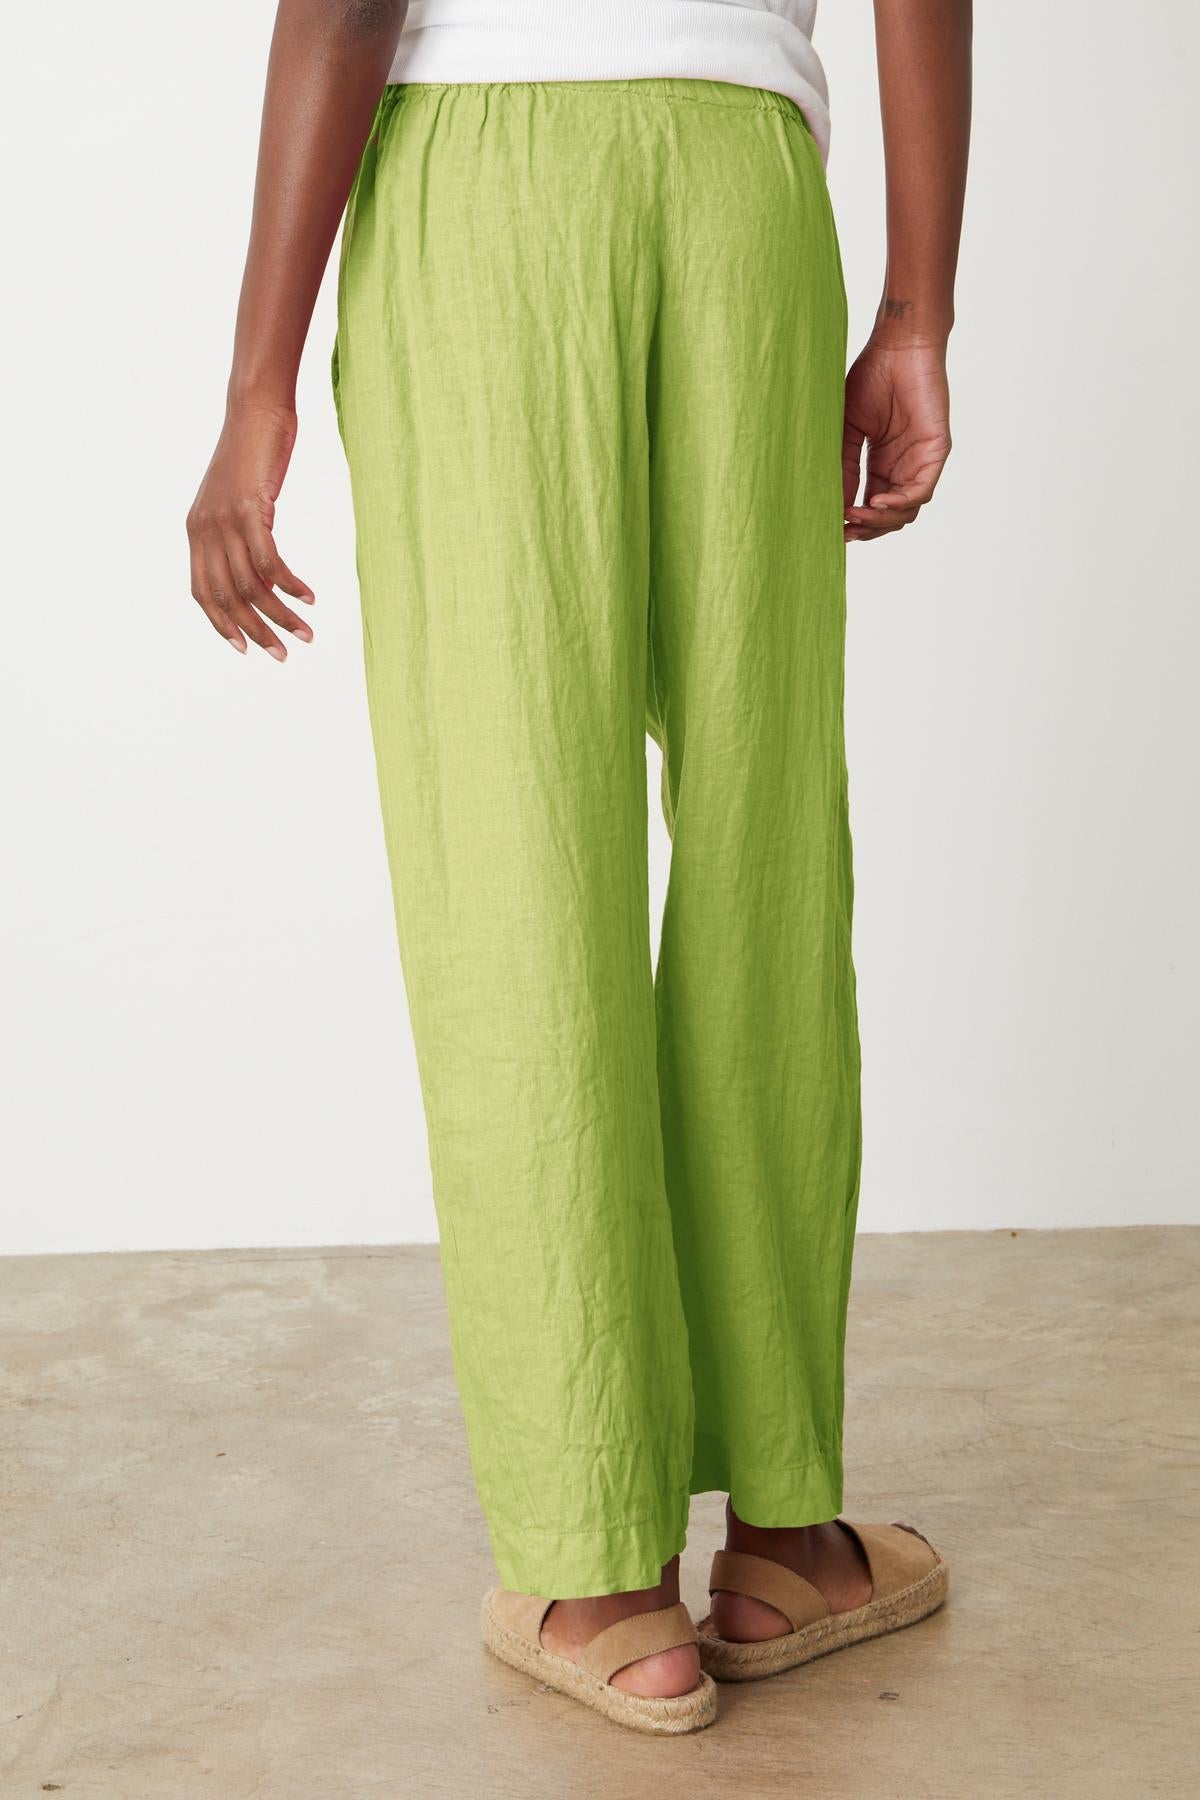 Lola pant in kiwi green colored linen back-35206342017217